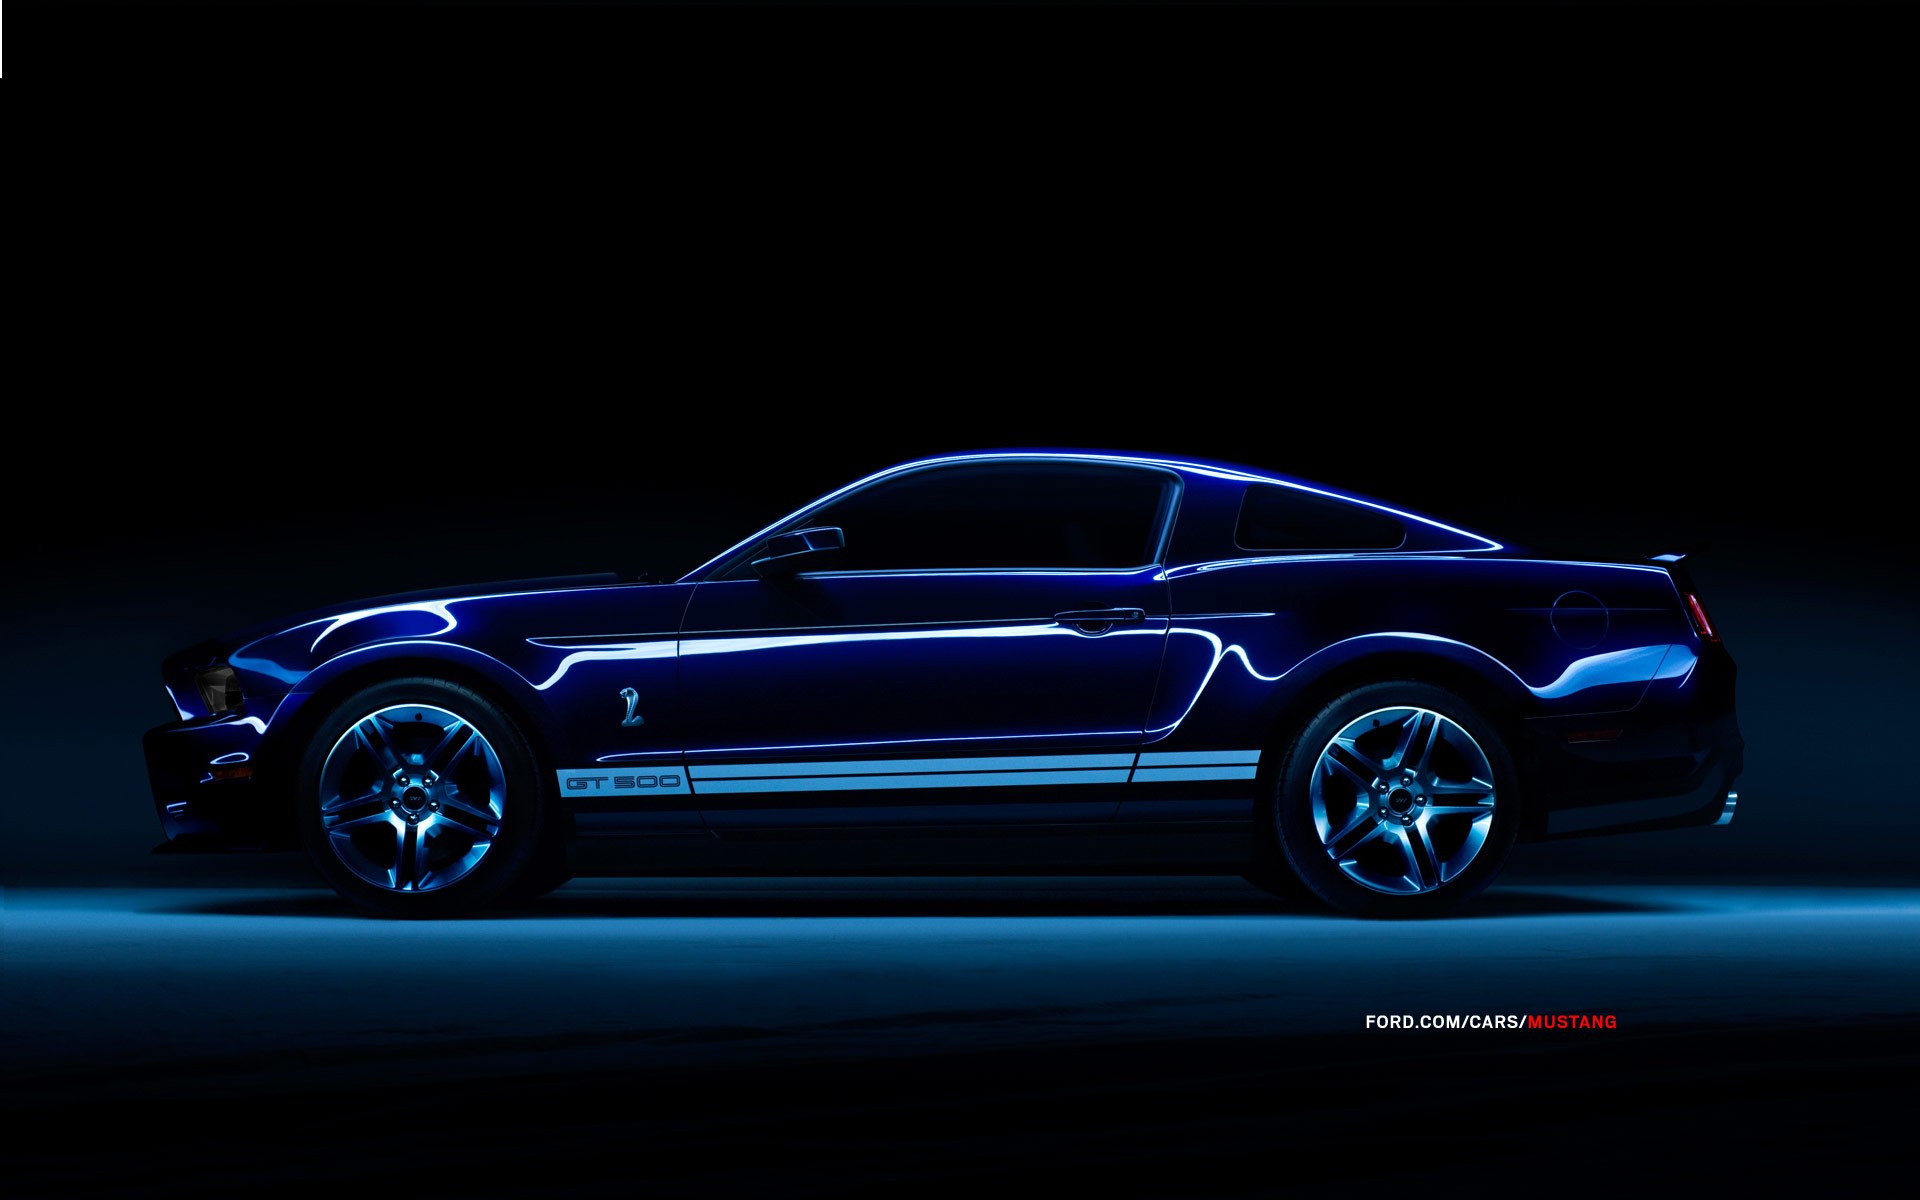 blue, Red, Cobra, Ford, Ford, Mustang, Burnout, Shelby, Mustang, Shelby, Gt500, Shelby, Gt500, Supersnake Wallpaper